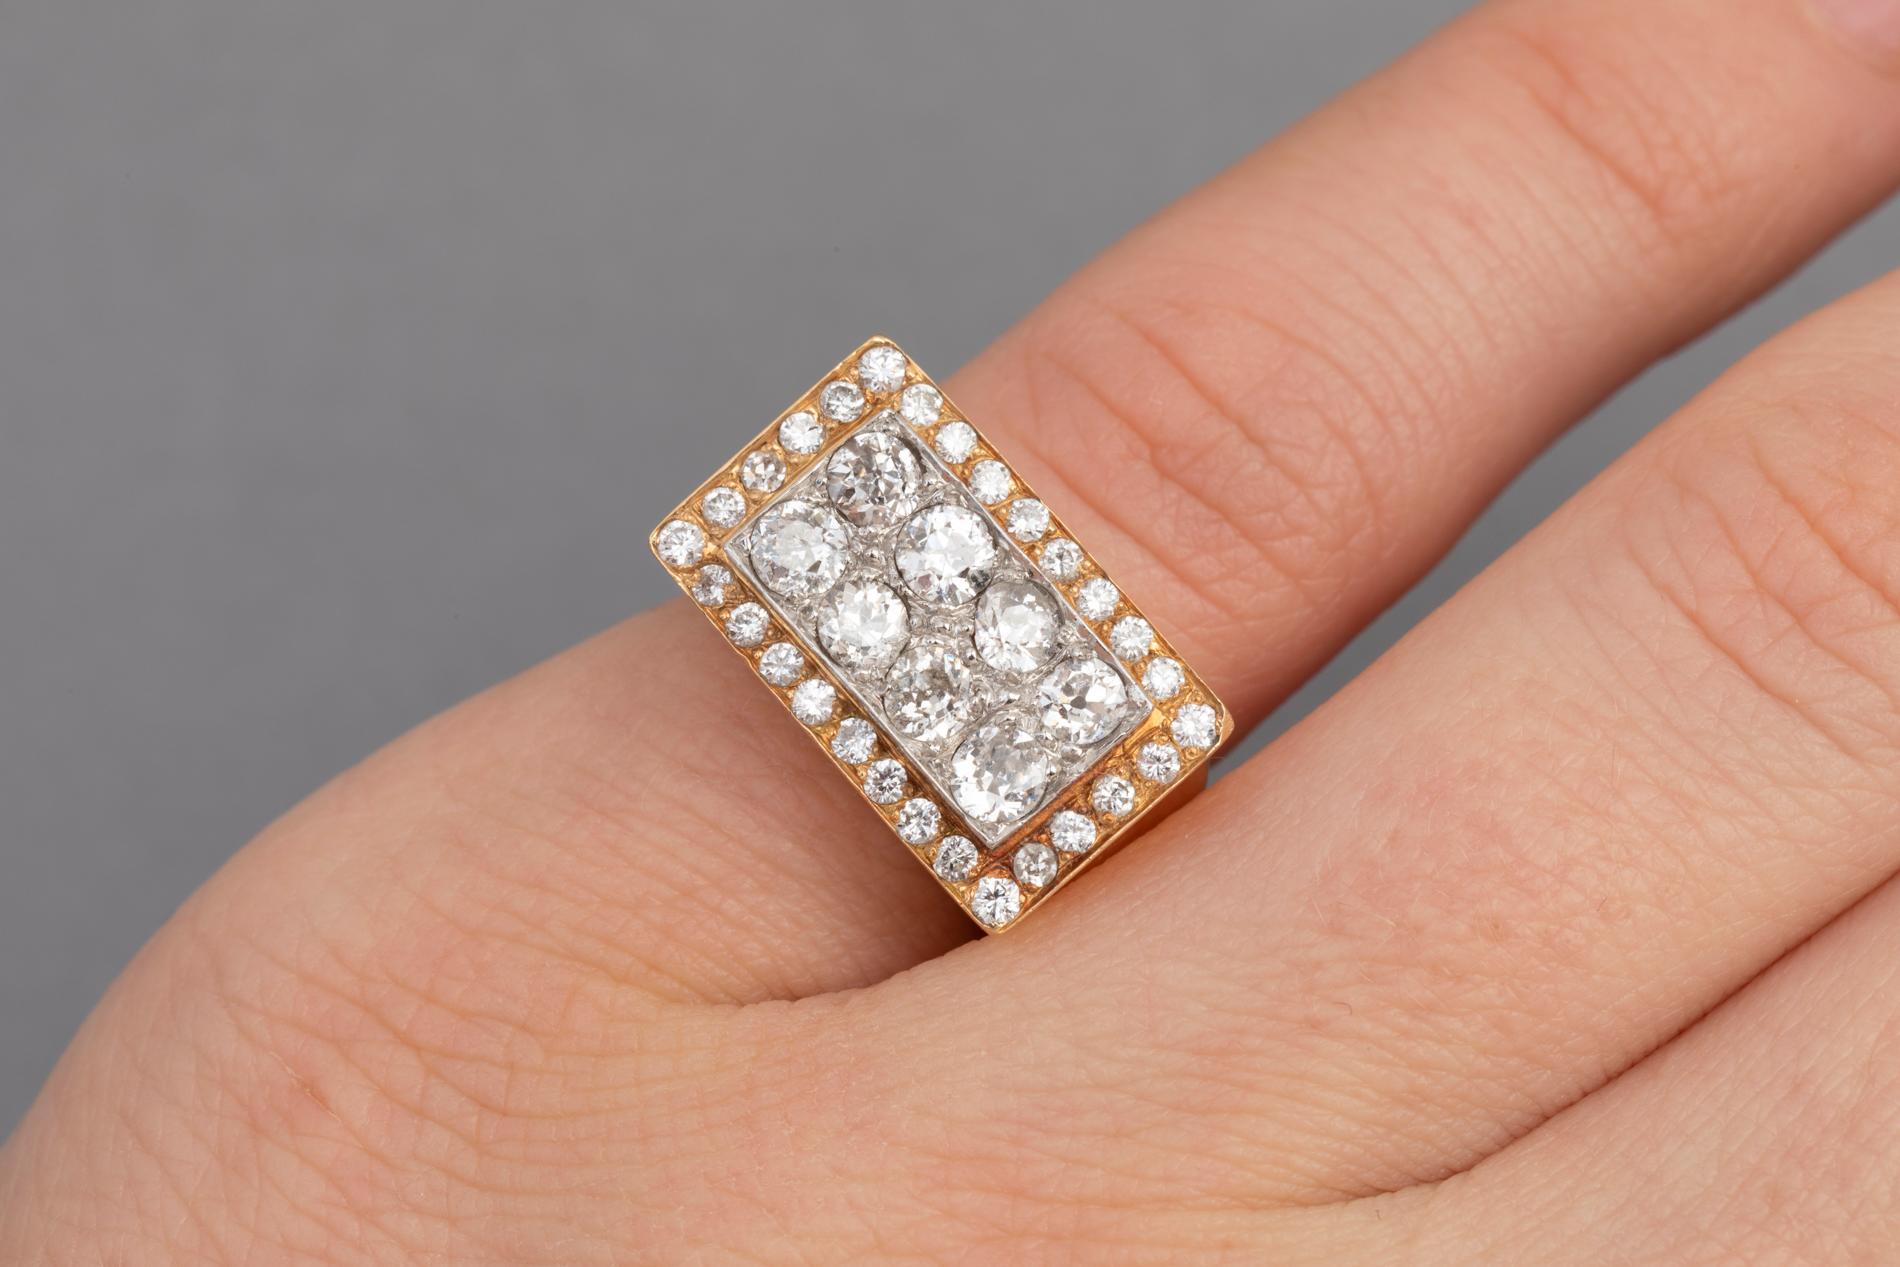 Very beautiful retro ring, made in France circa 1940.

Mounted in yellow gold 750, Platinum and beautiful diamonds. 

The central diamonds weights 0.15 each estimate, brillant cut, they shine ver. Total weight 1.50 carats. 

Ring size: 3.5 us OR 46